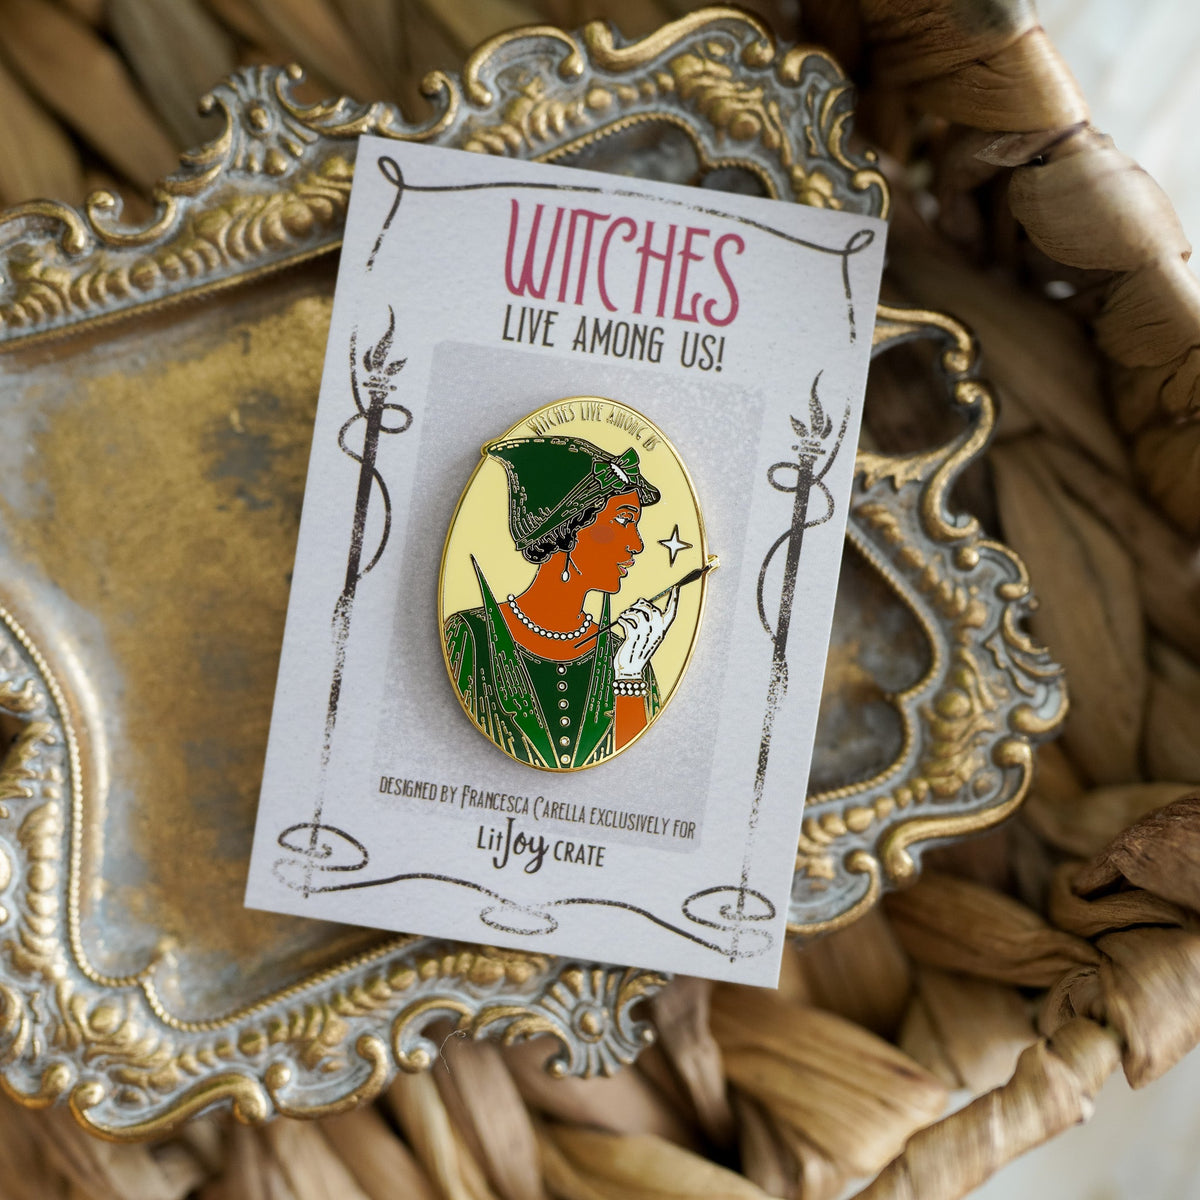 Worldwide Witch Pins from LitJoy Crate | Collectibles &amp; Gifts for Booklovers